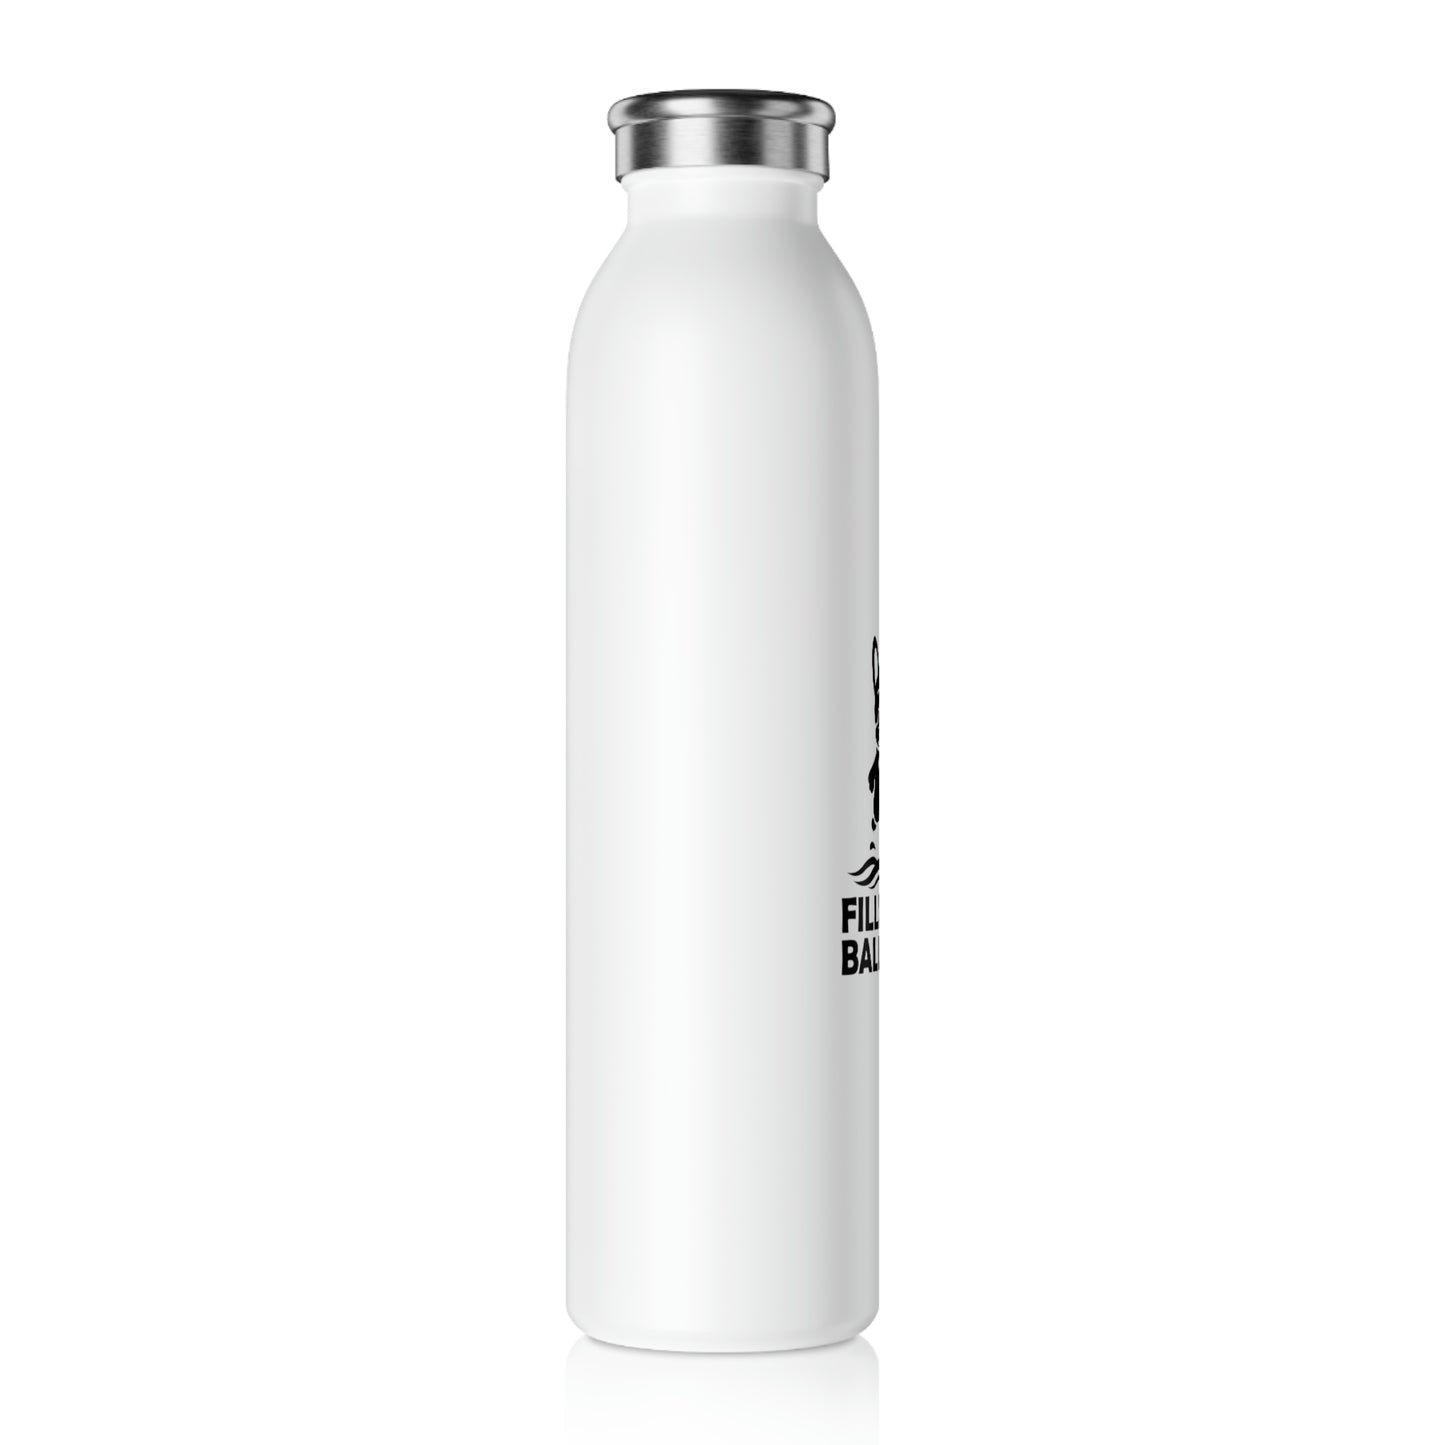 Dempsey The Frenchie Stainless Steel Wide Mouth Slim Matt White Water Bottle